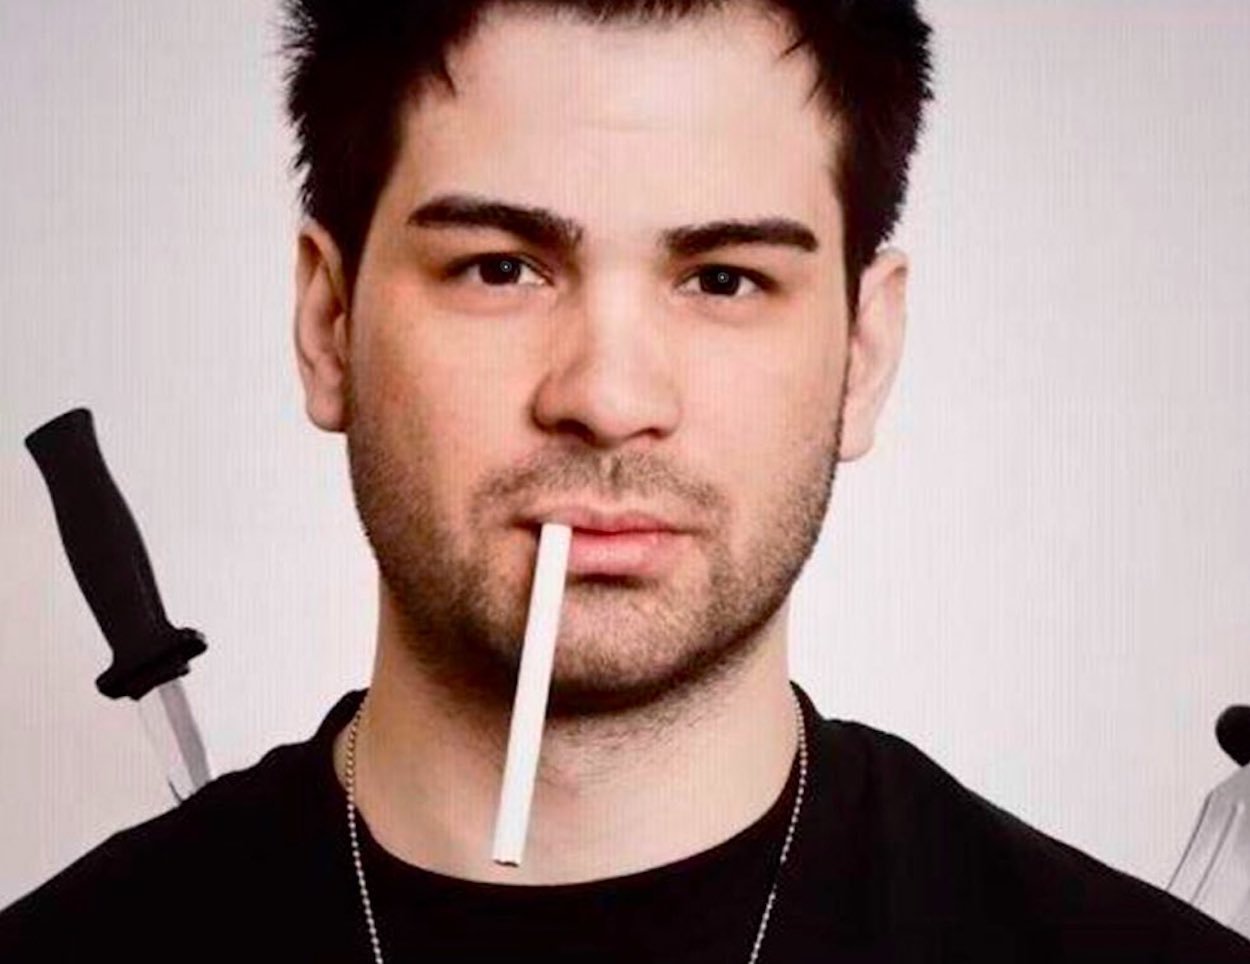 'Is Anyone up' Founder Hunter Moore Made 100,000 After Getting Stabbed